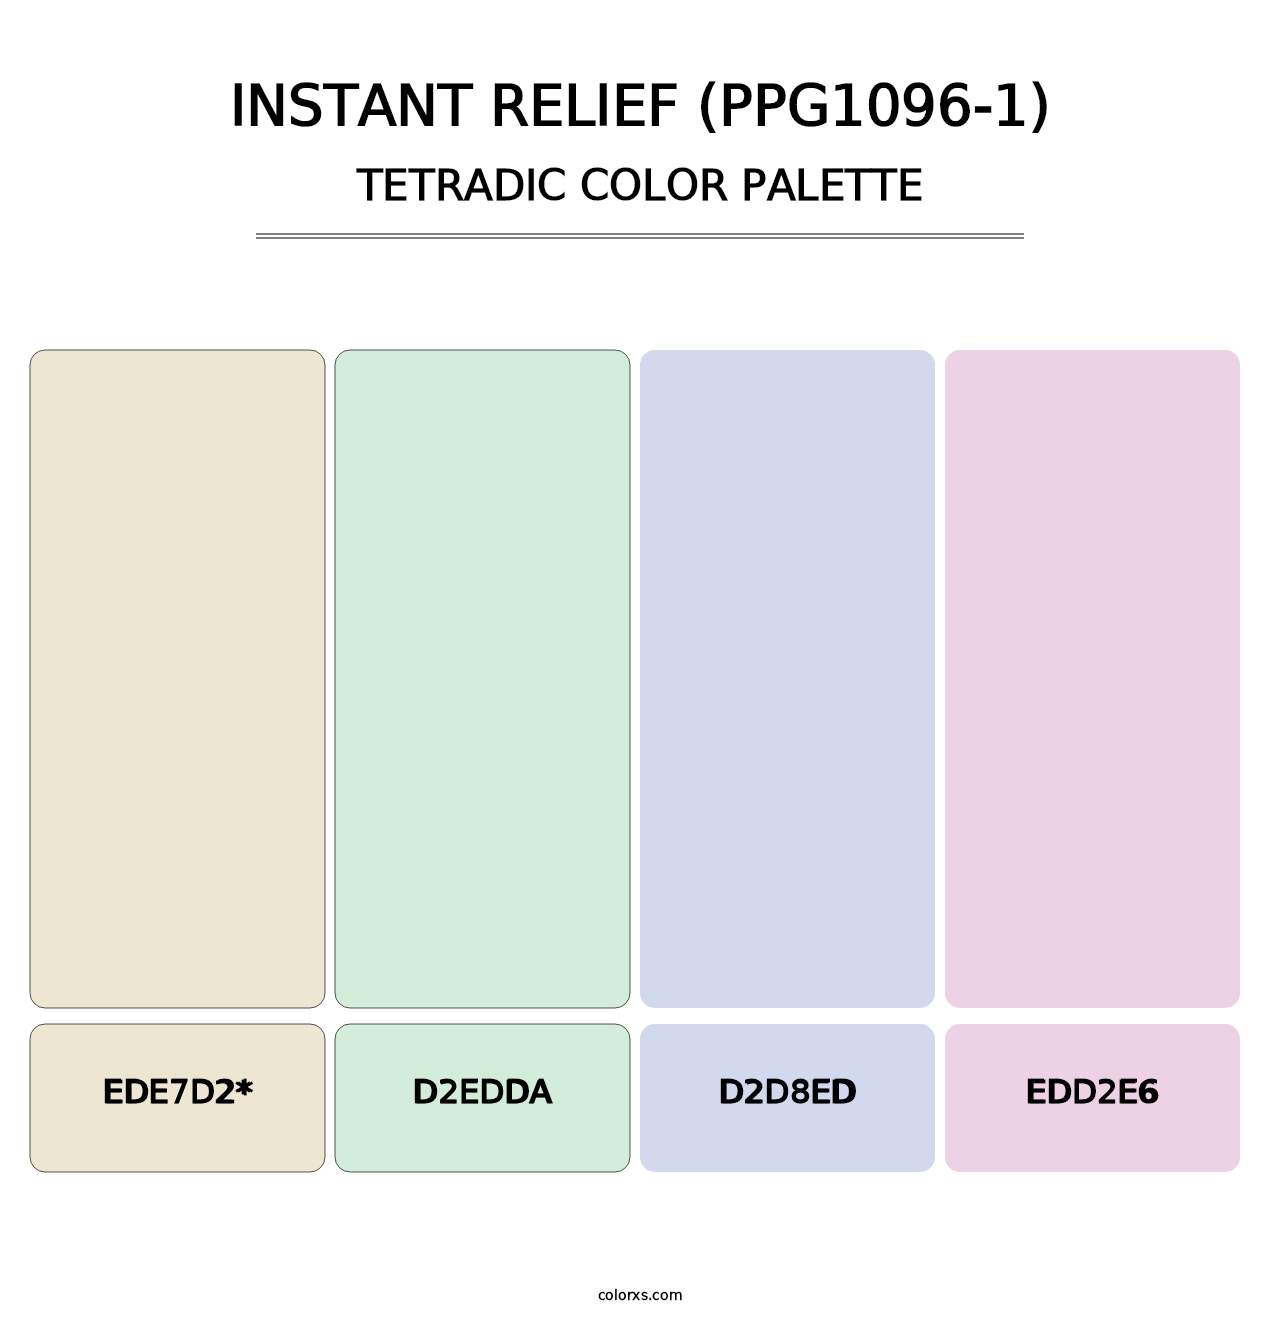 Instant Relief (PPG1096-1) - Tetradic Color Palette